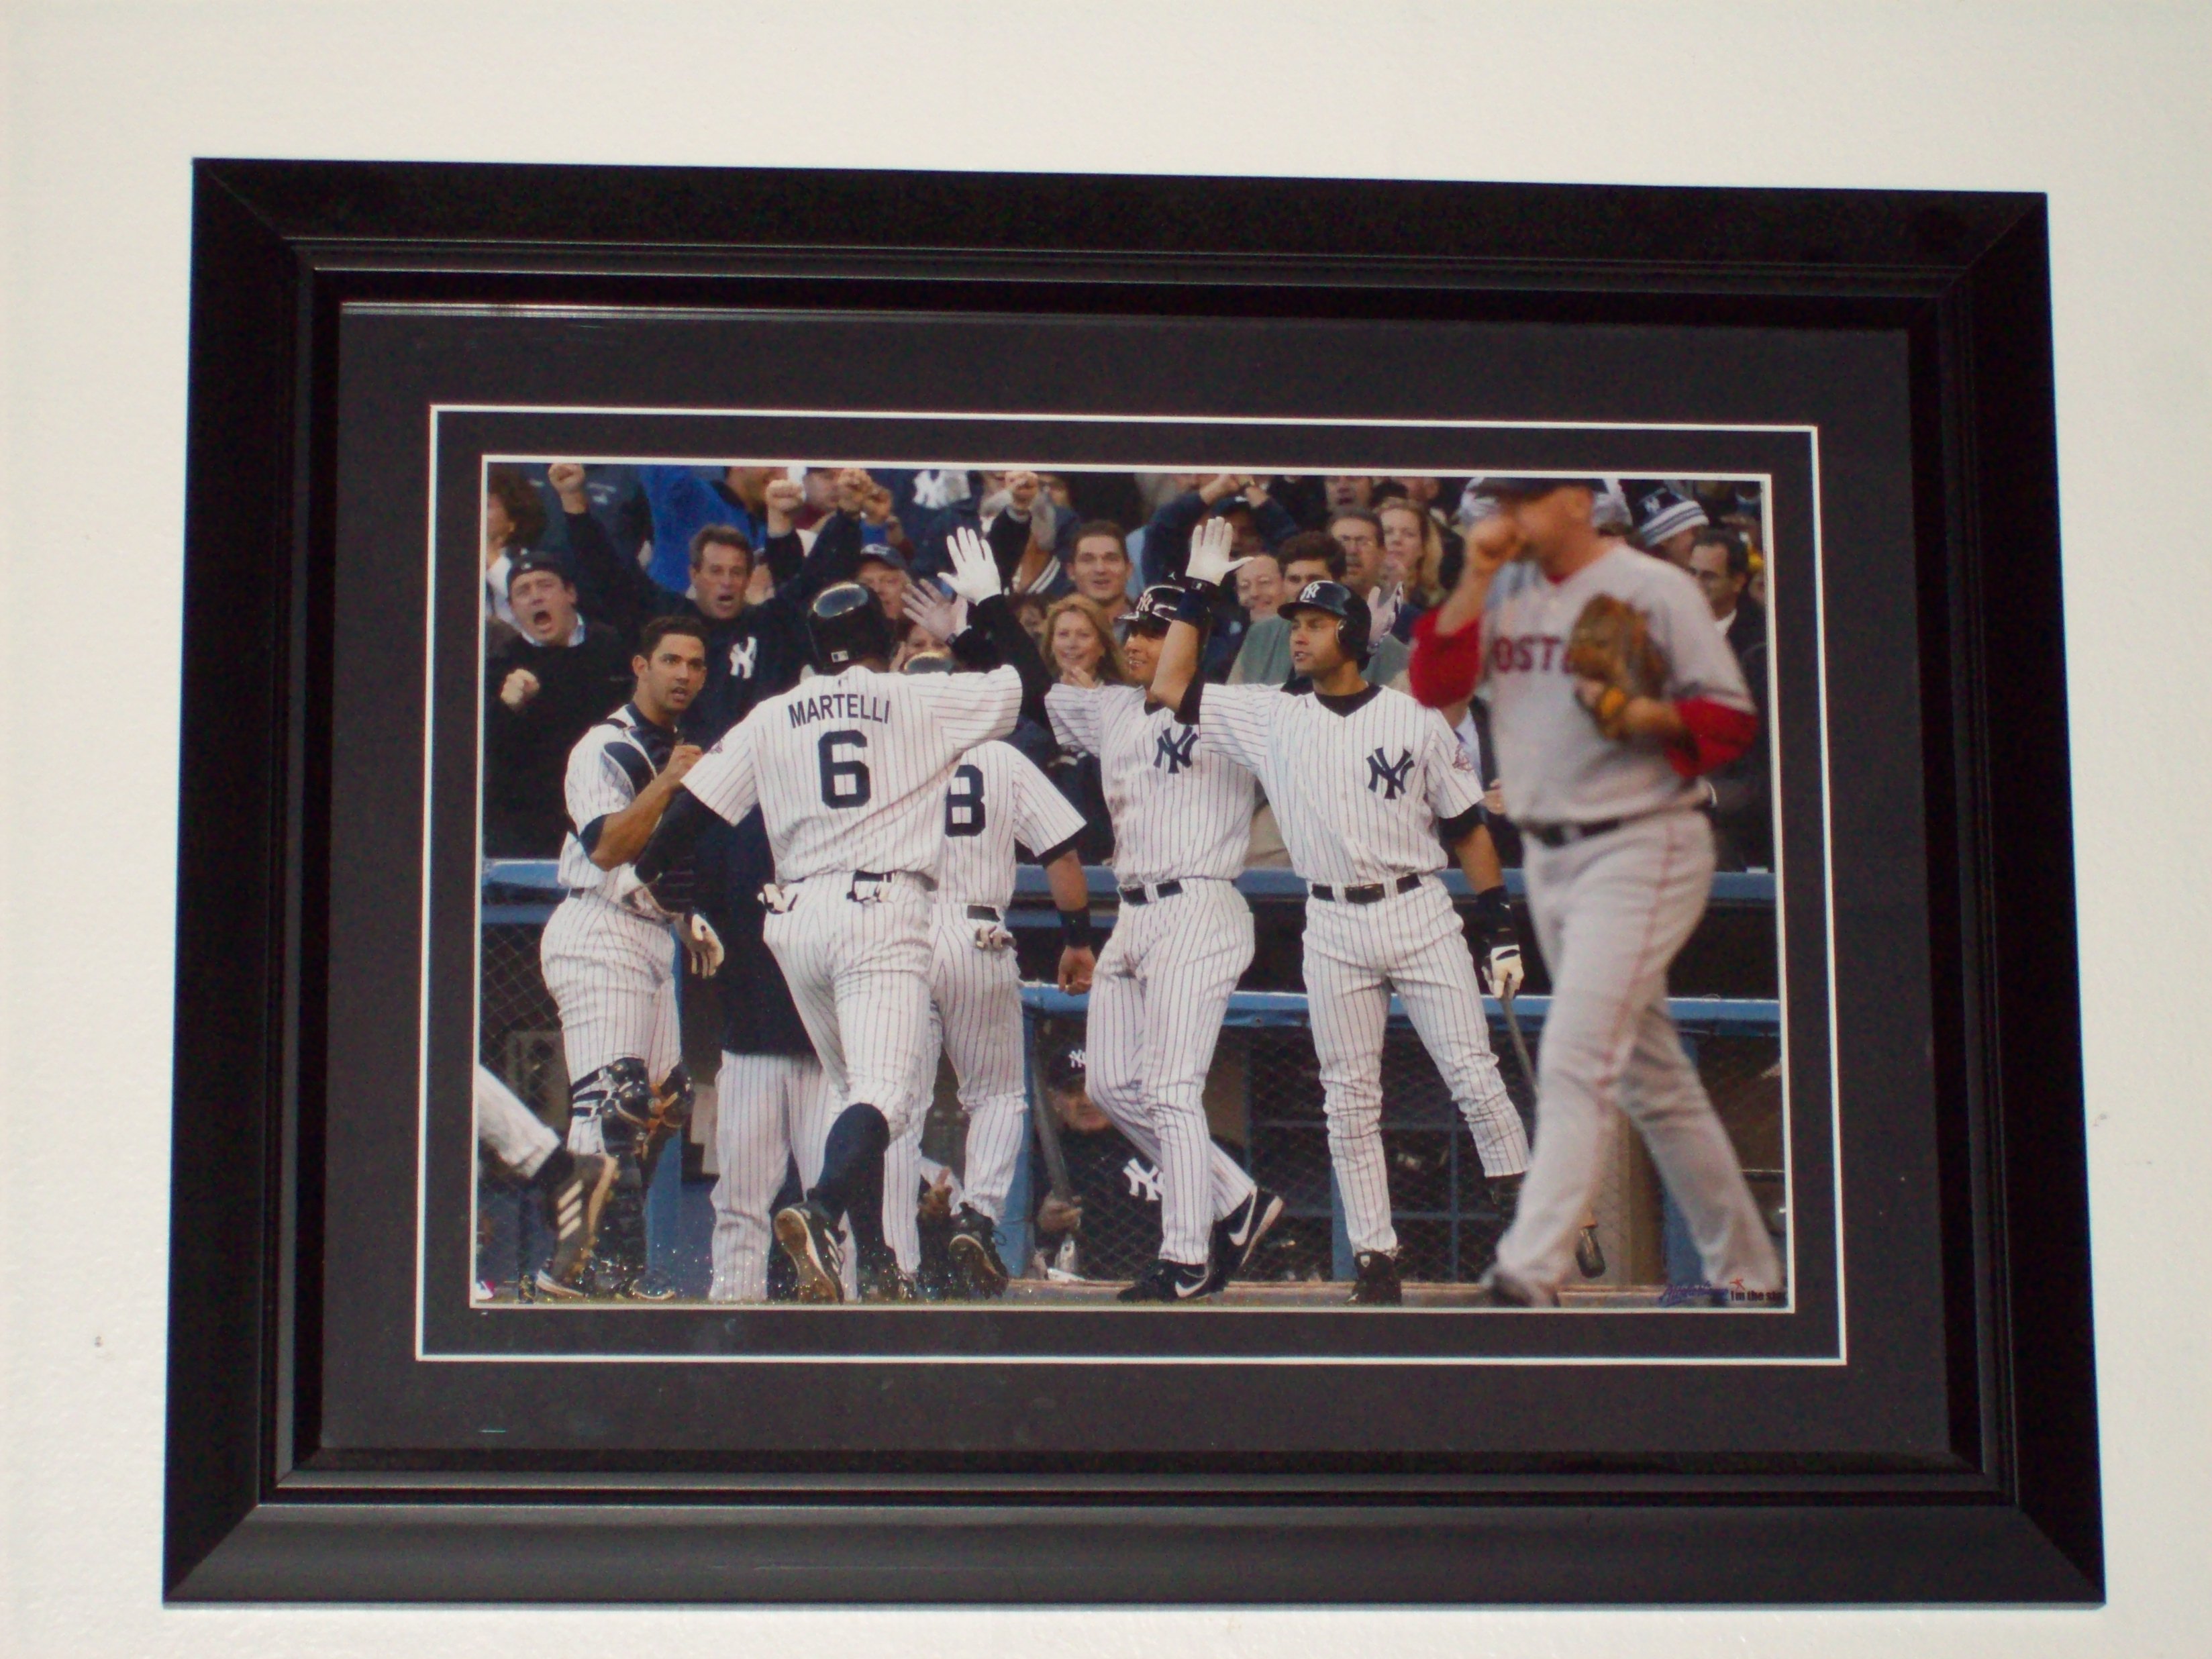 My personalized Yankee photo, one of my birthday gifts in 2007